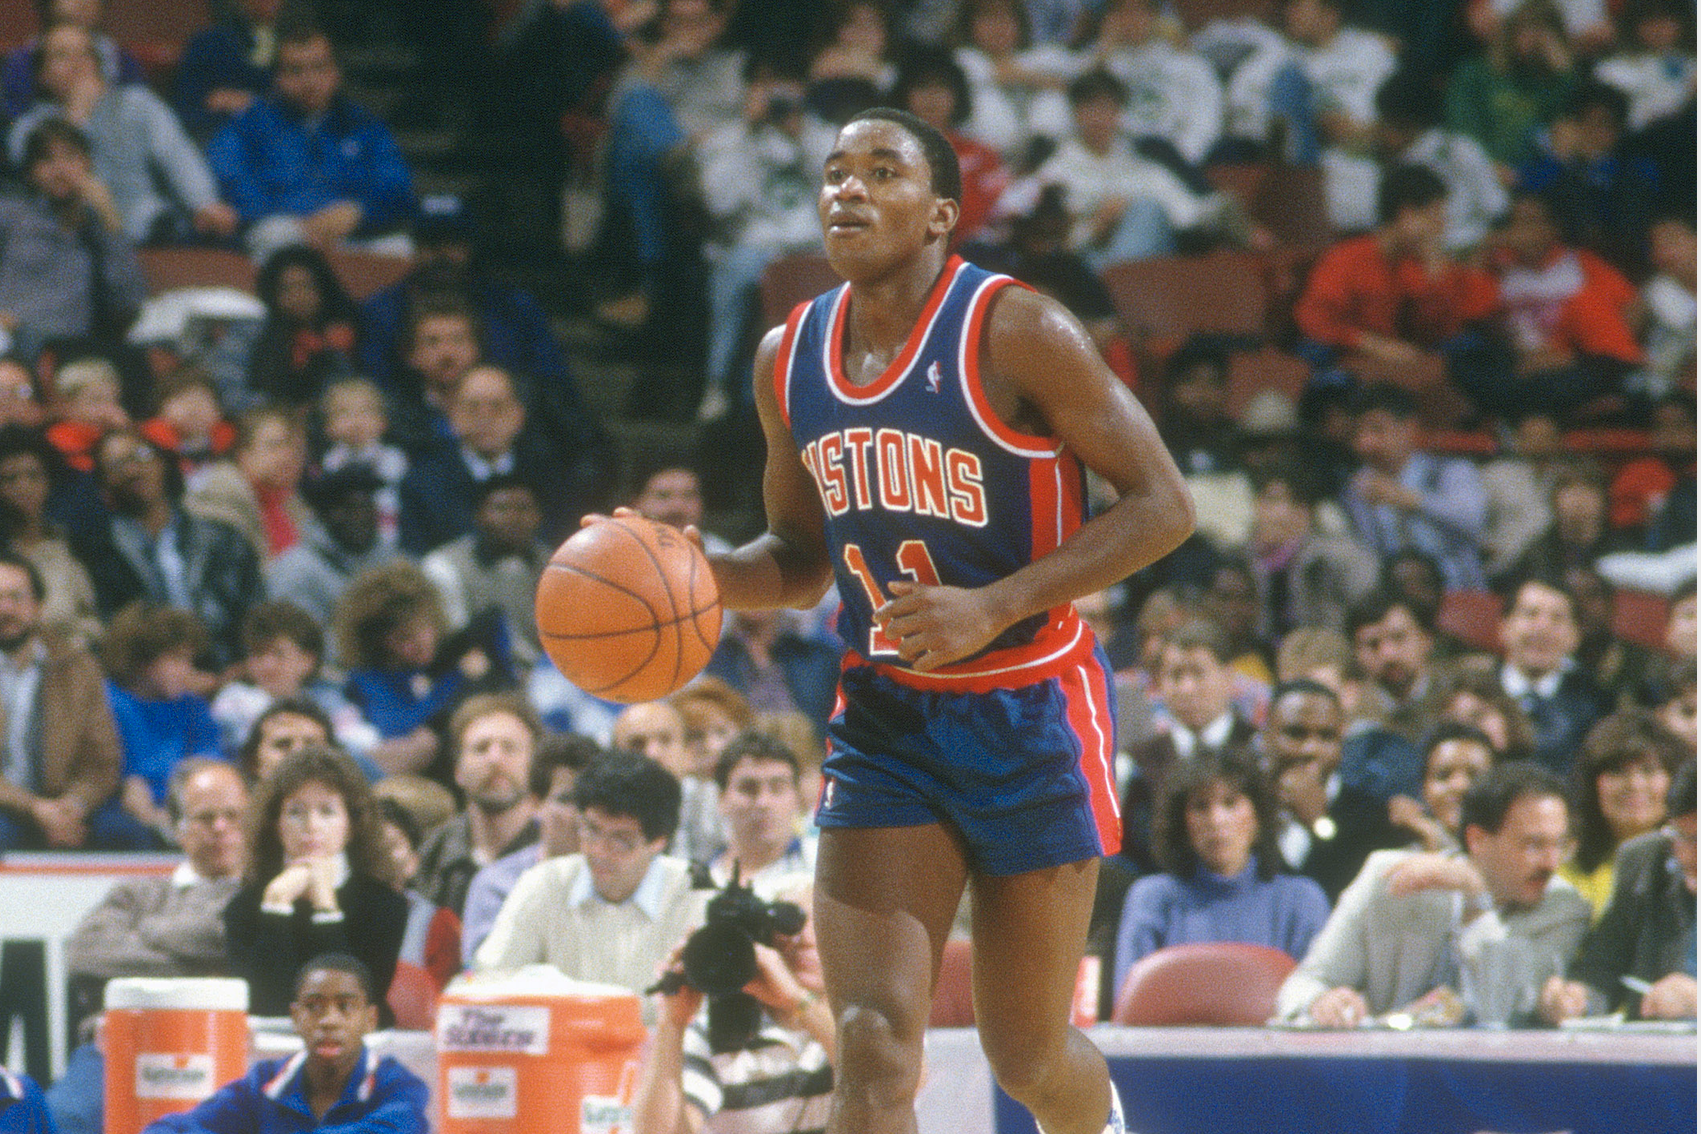 Rich Cohens New NBA Book Makes the Case for Isiah Thomas